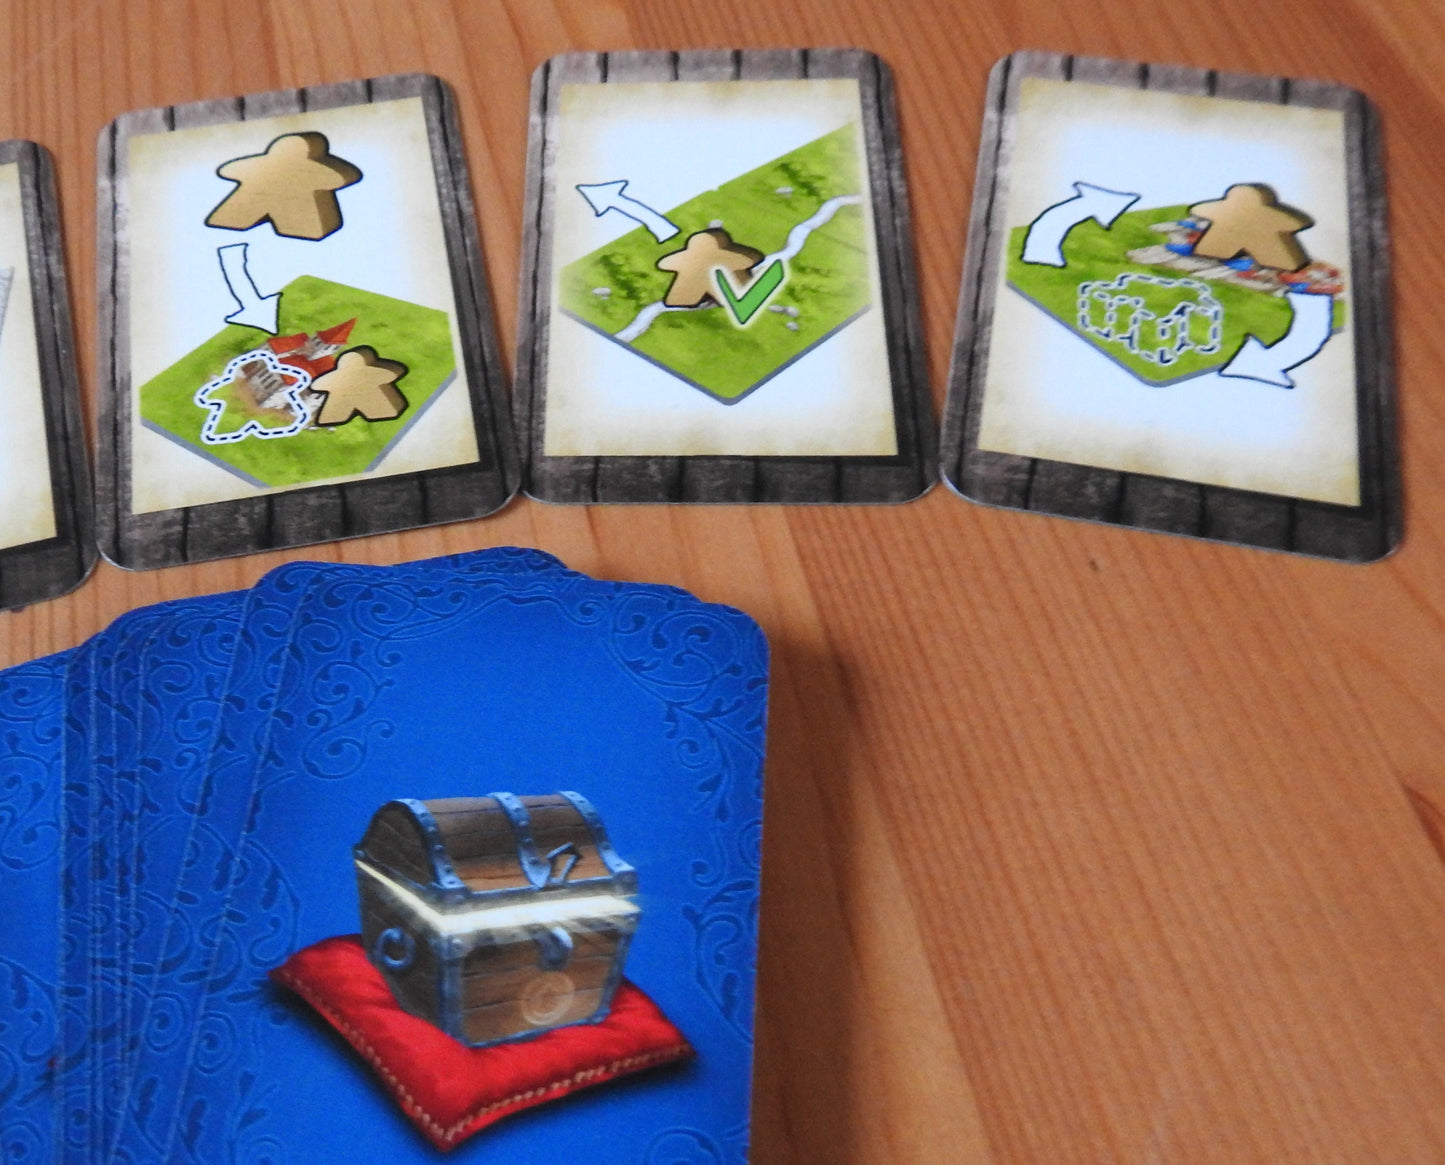 Another view showing more of the different cards included with Carcassonne Gifts.